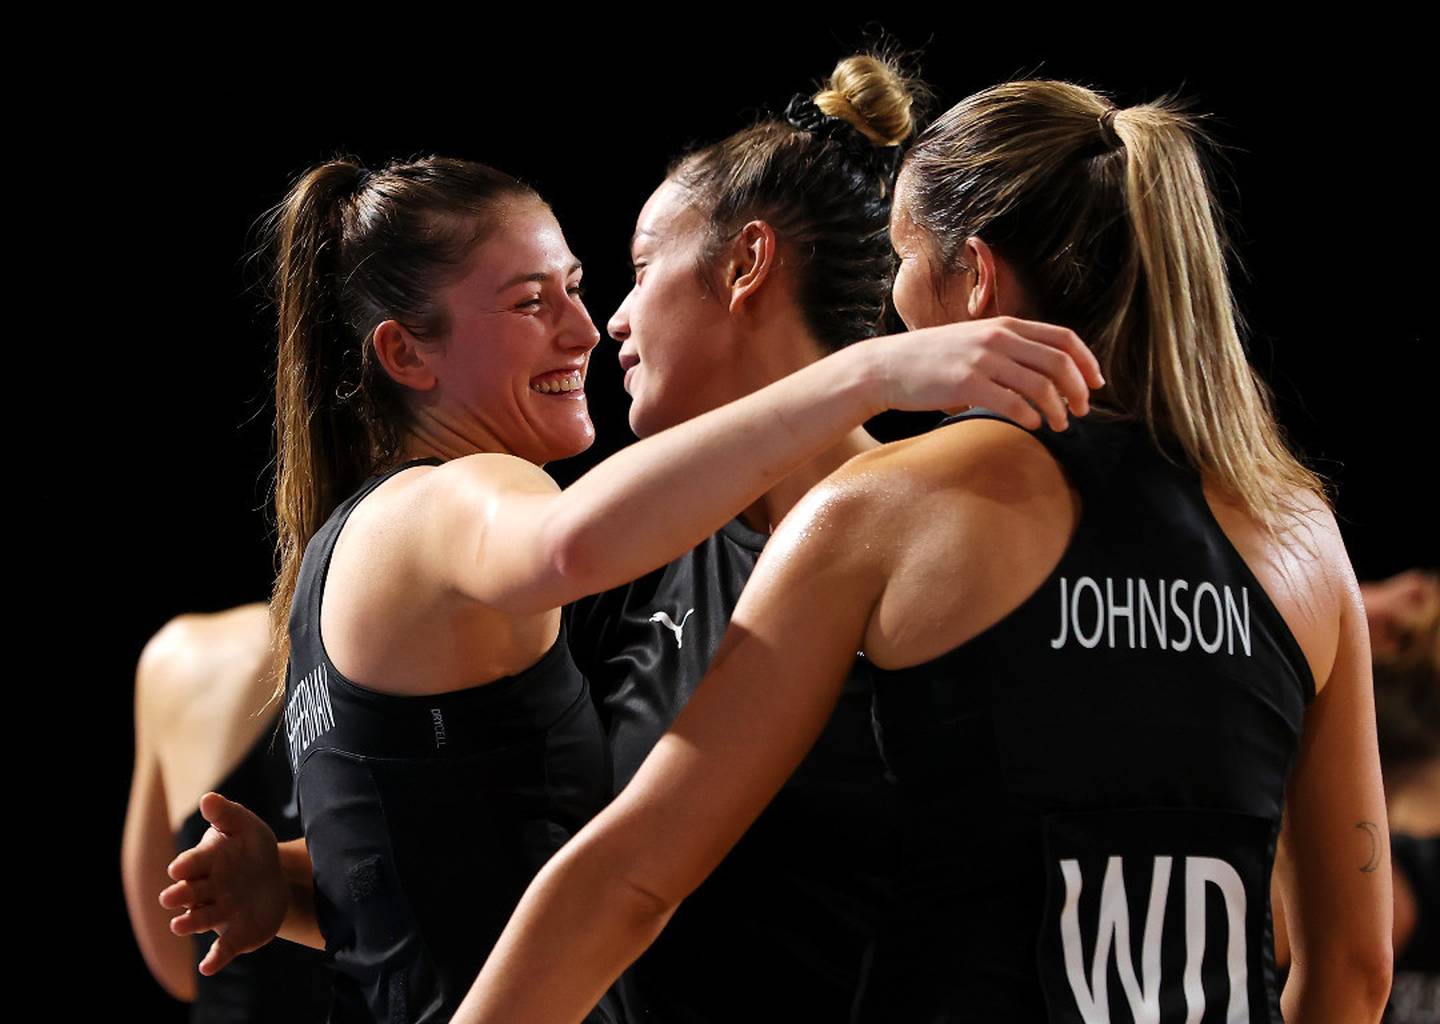 The Silver Ferns were all smiles after their win in Malawi. Photo / Getty